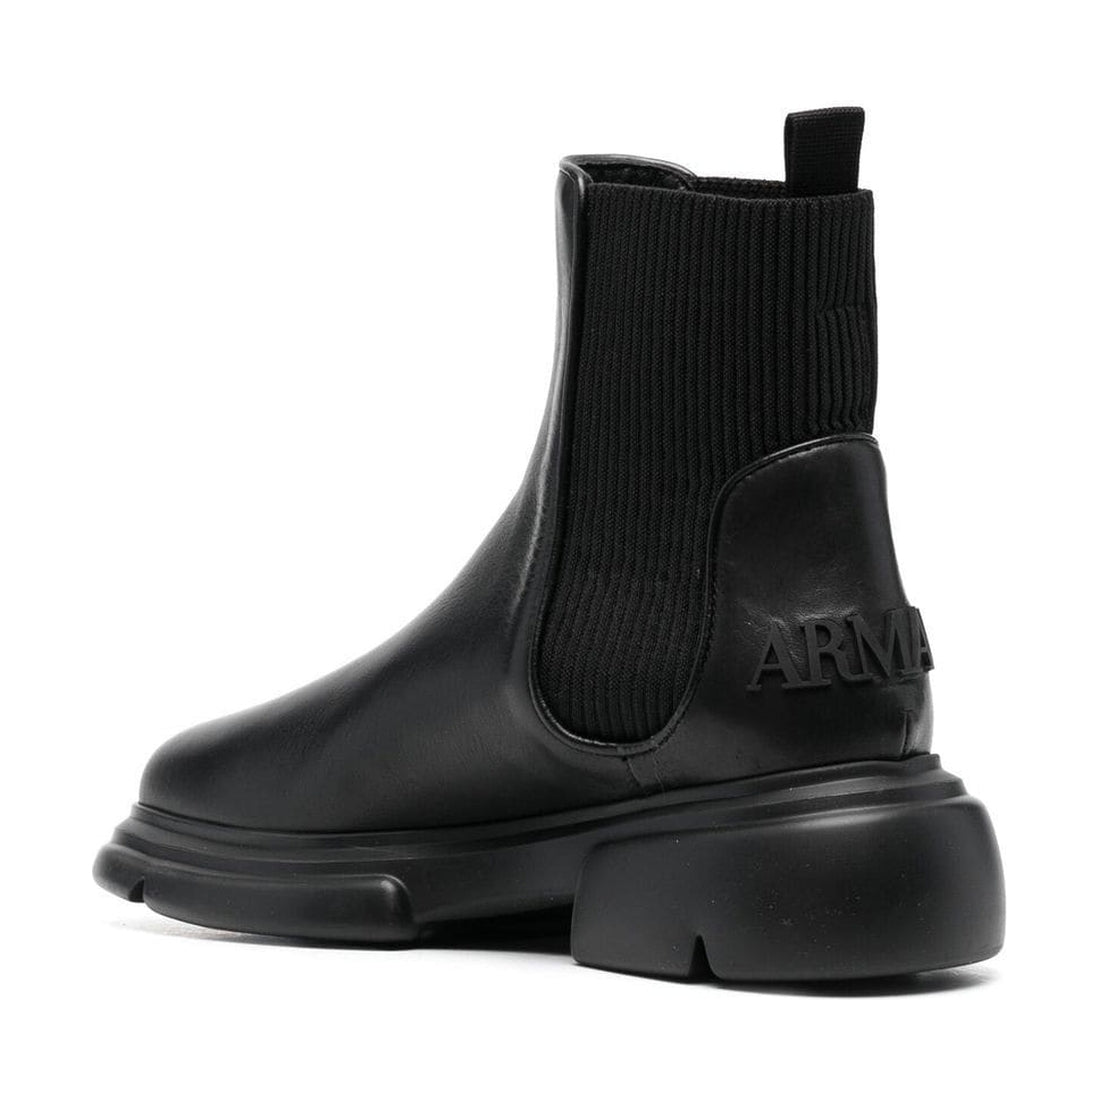 black casual boot